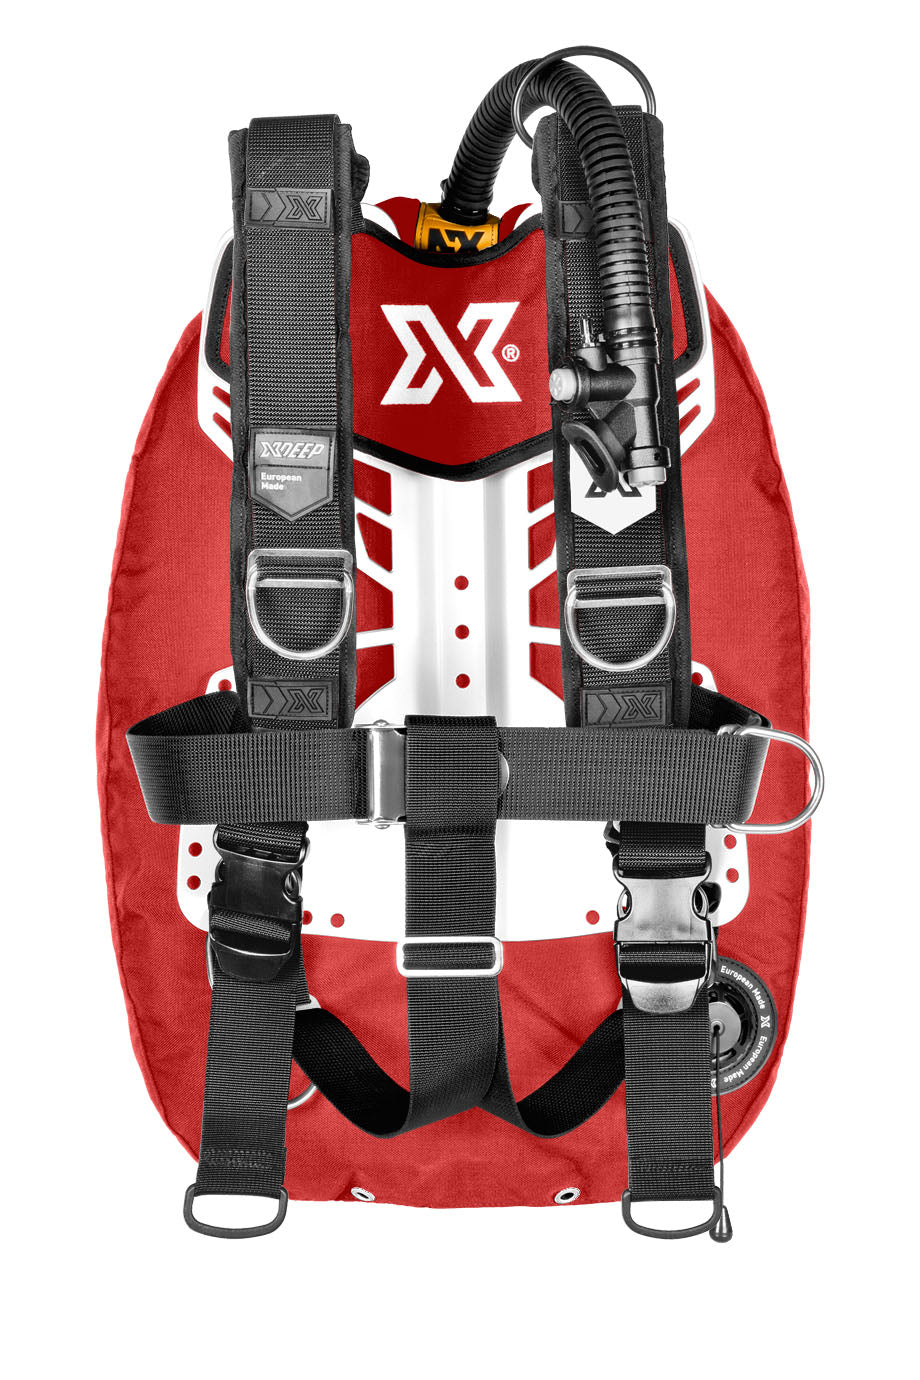 XDEEP XDEEP Zen Ultralight Wing System Deluxe / Small / Red - Oyster Diving